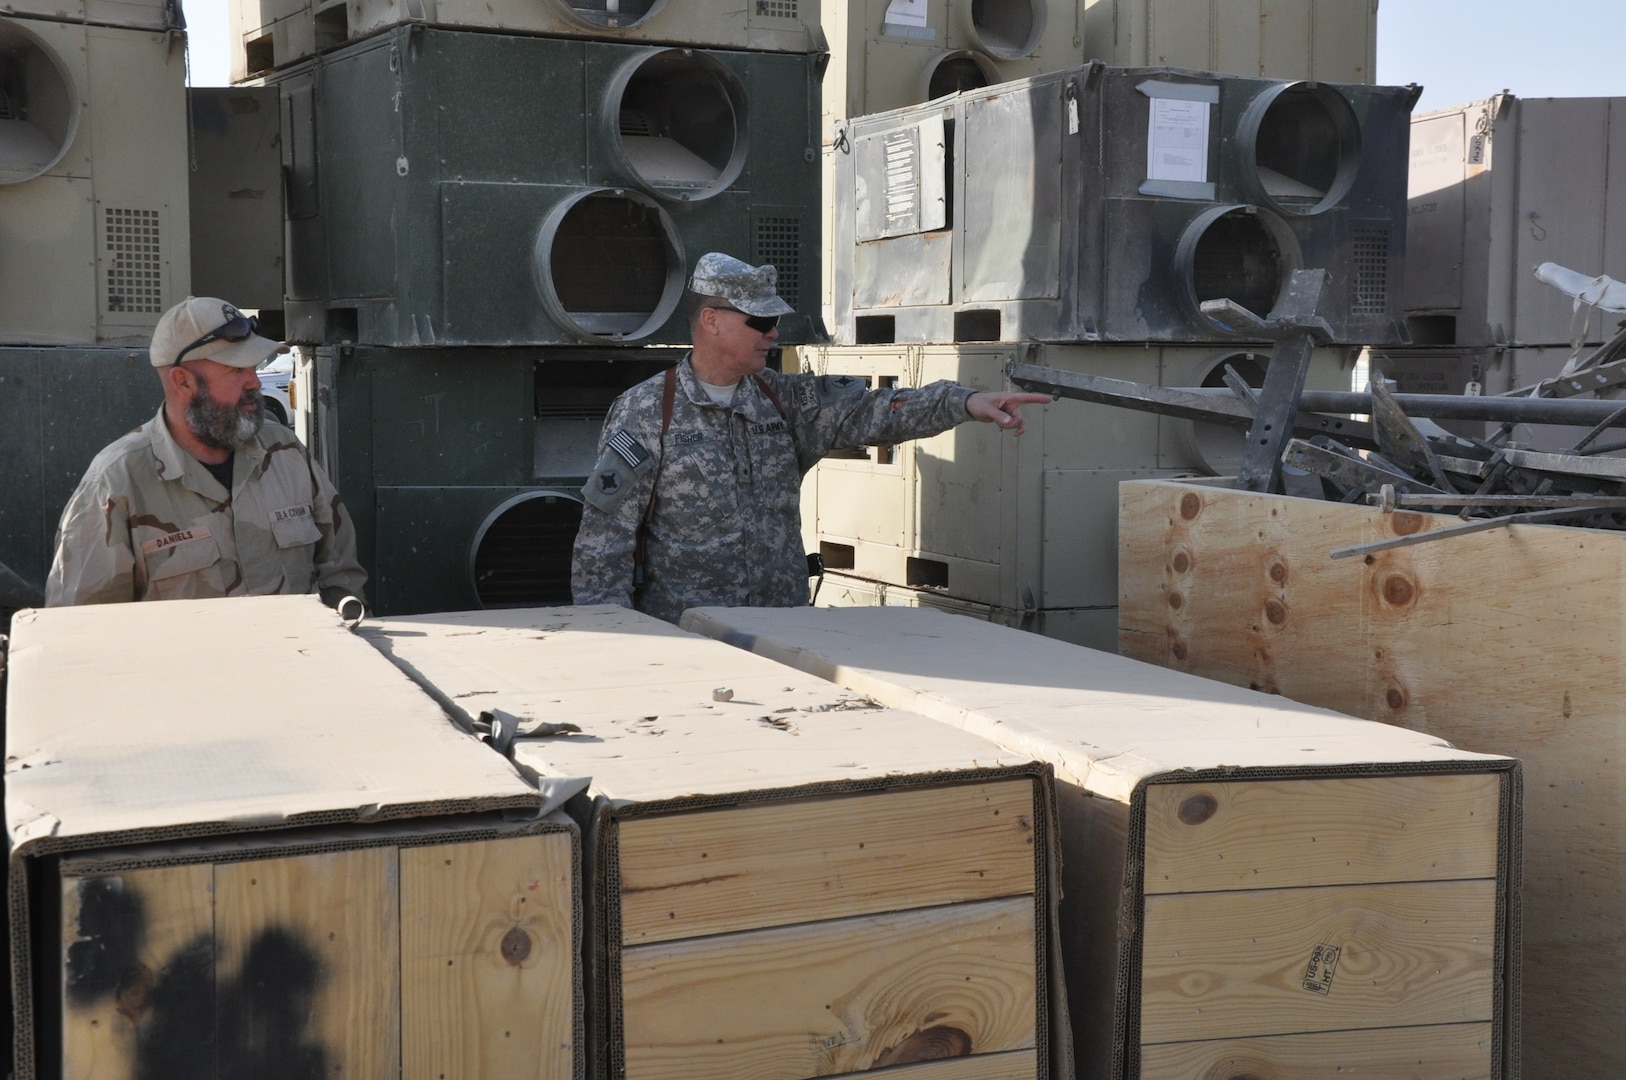 Two soldiers stand in front of storage boxes, one pointing to equipment not shown